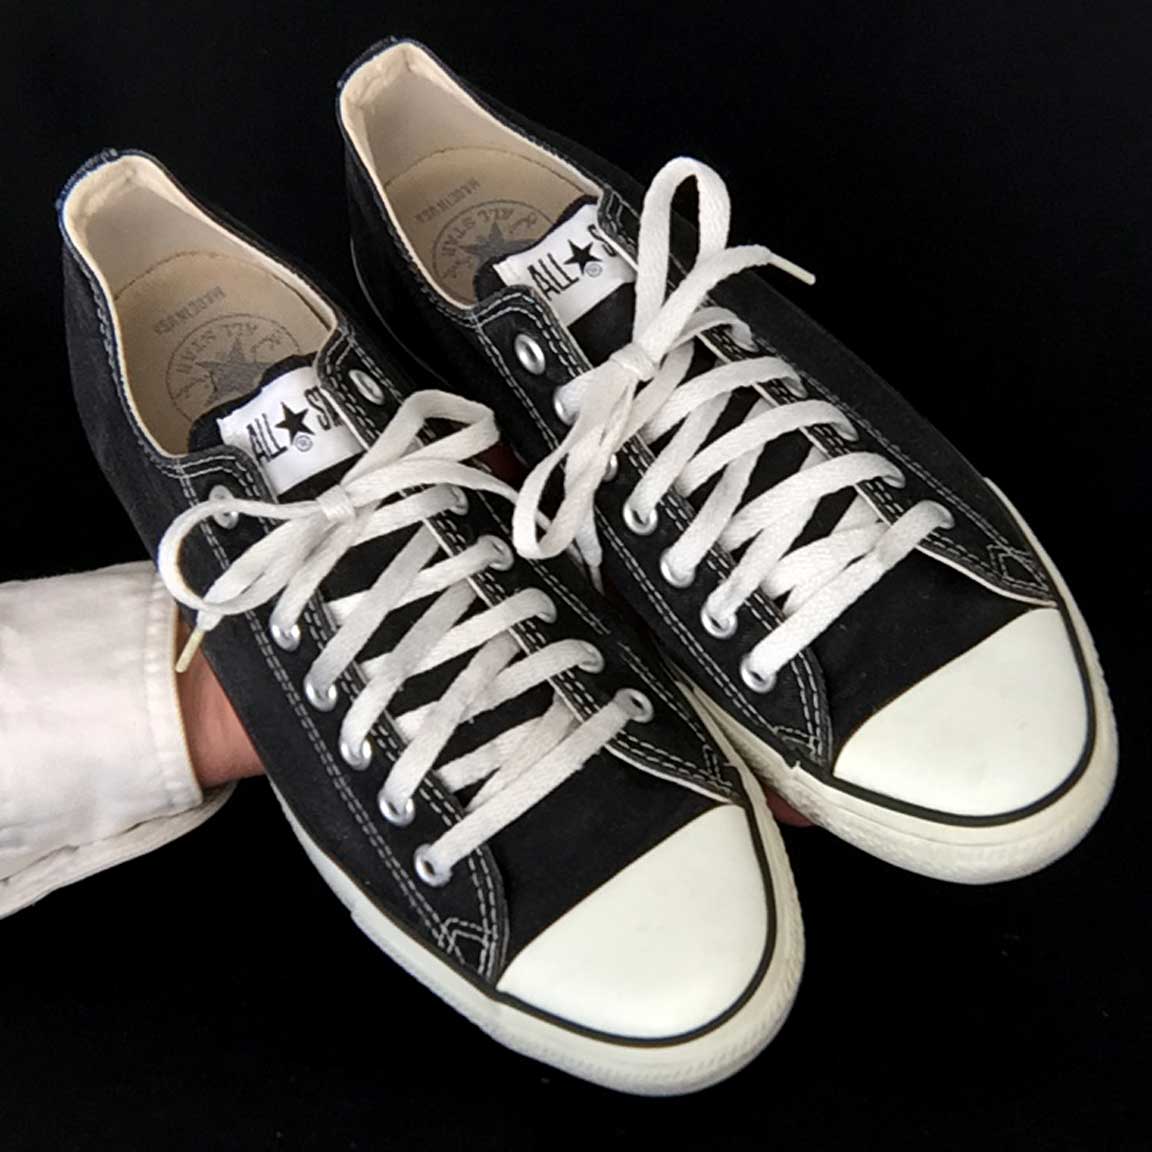 Vintage American-made Converse All Star black lo-top shoes for sale at http://www.collectornet.net/shoes